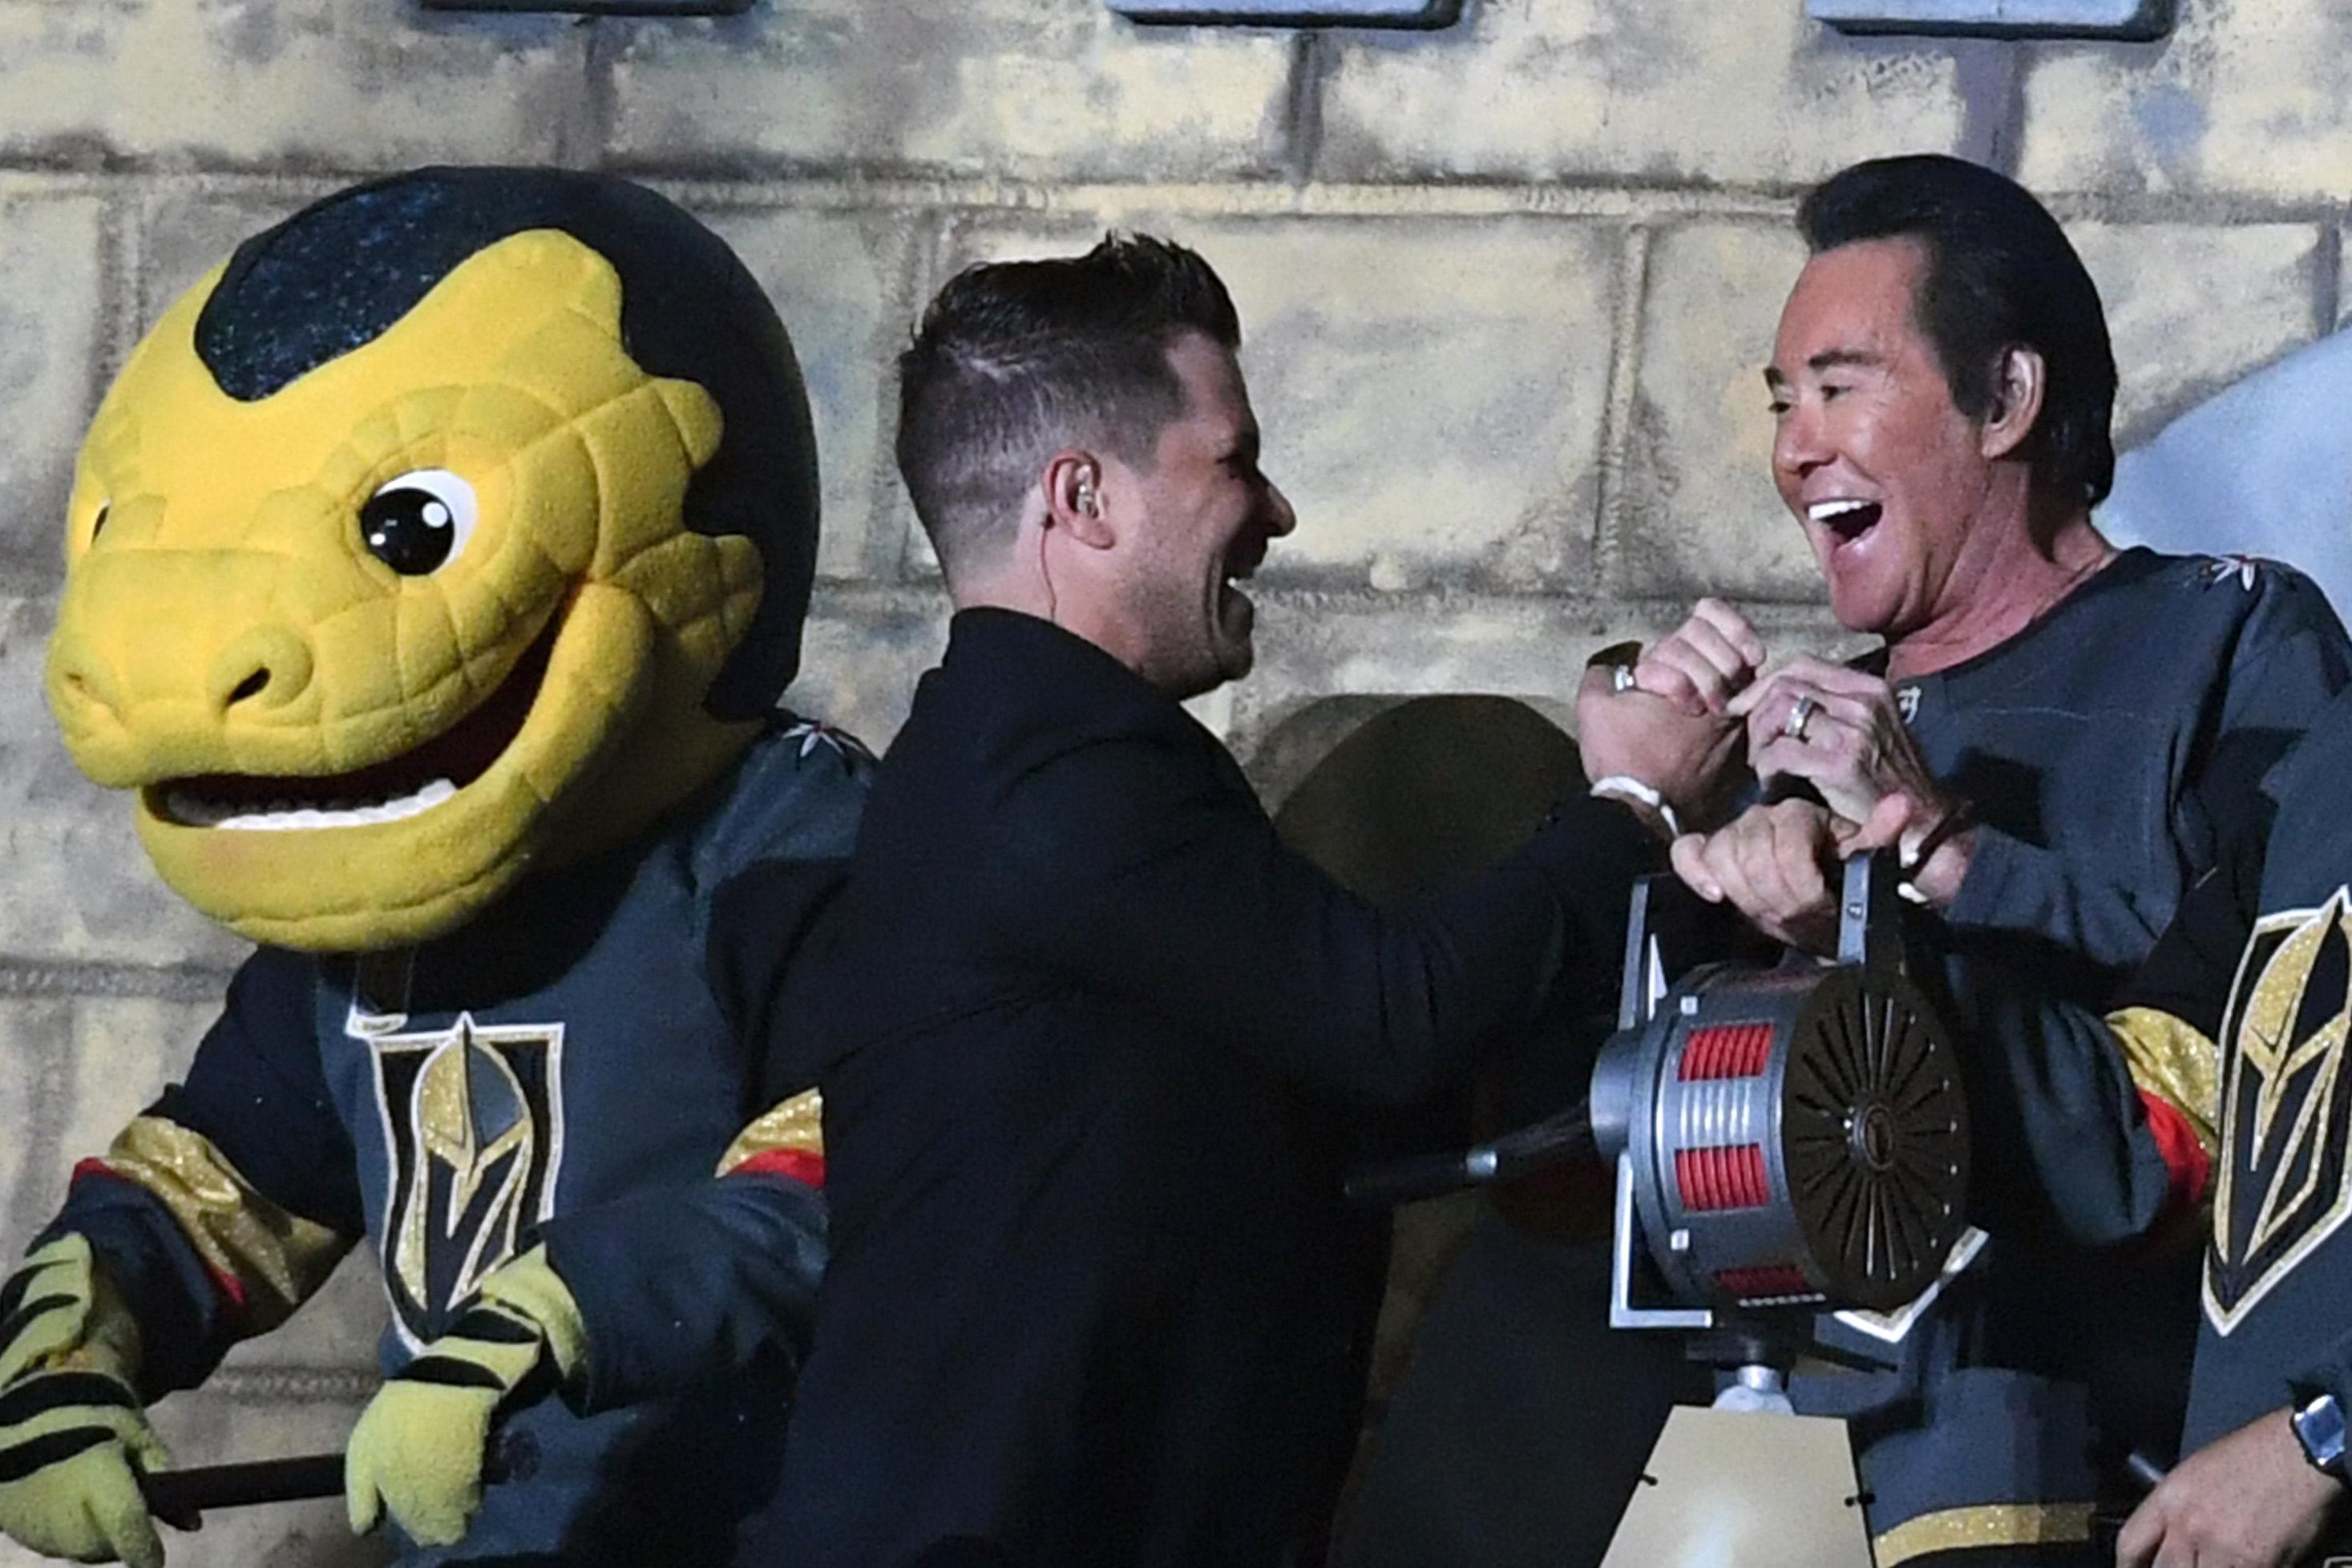 LAS VEGAS, NV - MAY 18:  The Vegas Golden Knights mascot Chance the Golden Gila Monster, Golden Knights host Mark Shunock and entertainer Wayne Newton react after Newton sounded a siren in the Castle before the start of the first period of Game Four of the Western Conference Finals between the Winnipeg Jets and the Golden Knights during the 2018 NHL Stanley Cup Playoffs at T-Mobile Arena on May 18, 2018 in Las Vegas, Nevada. The Golden Knights won 3-2.  (Photo by Ethan Miller/Getty Images)